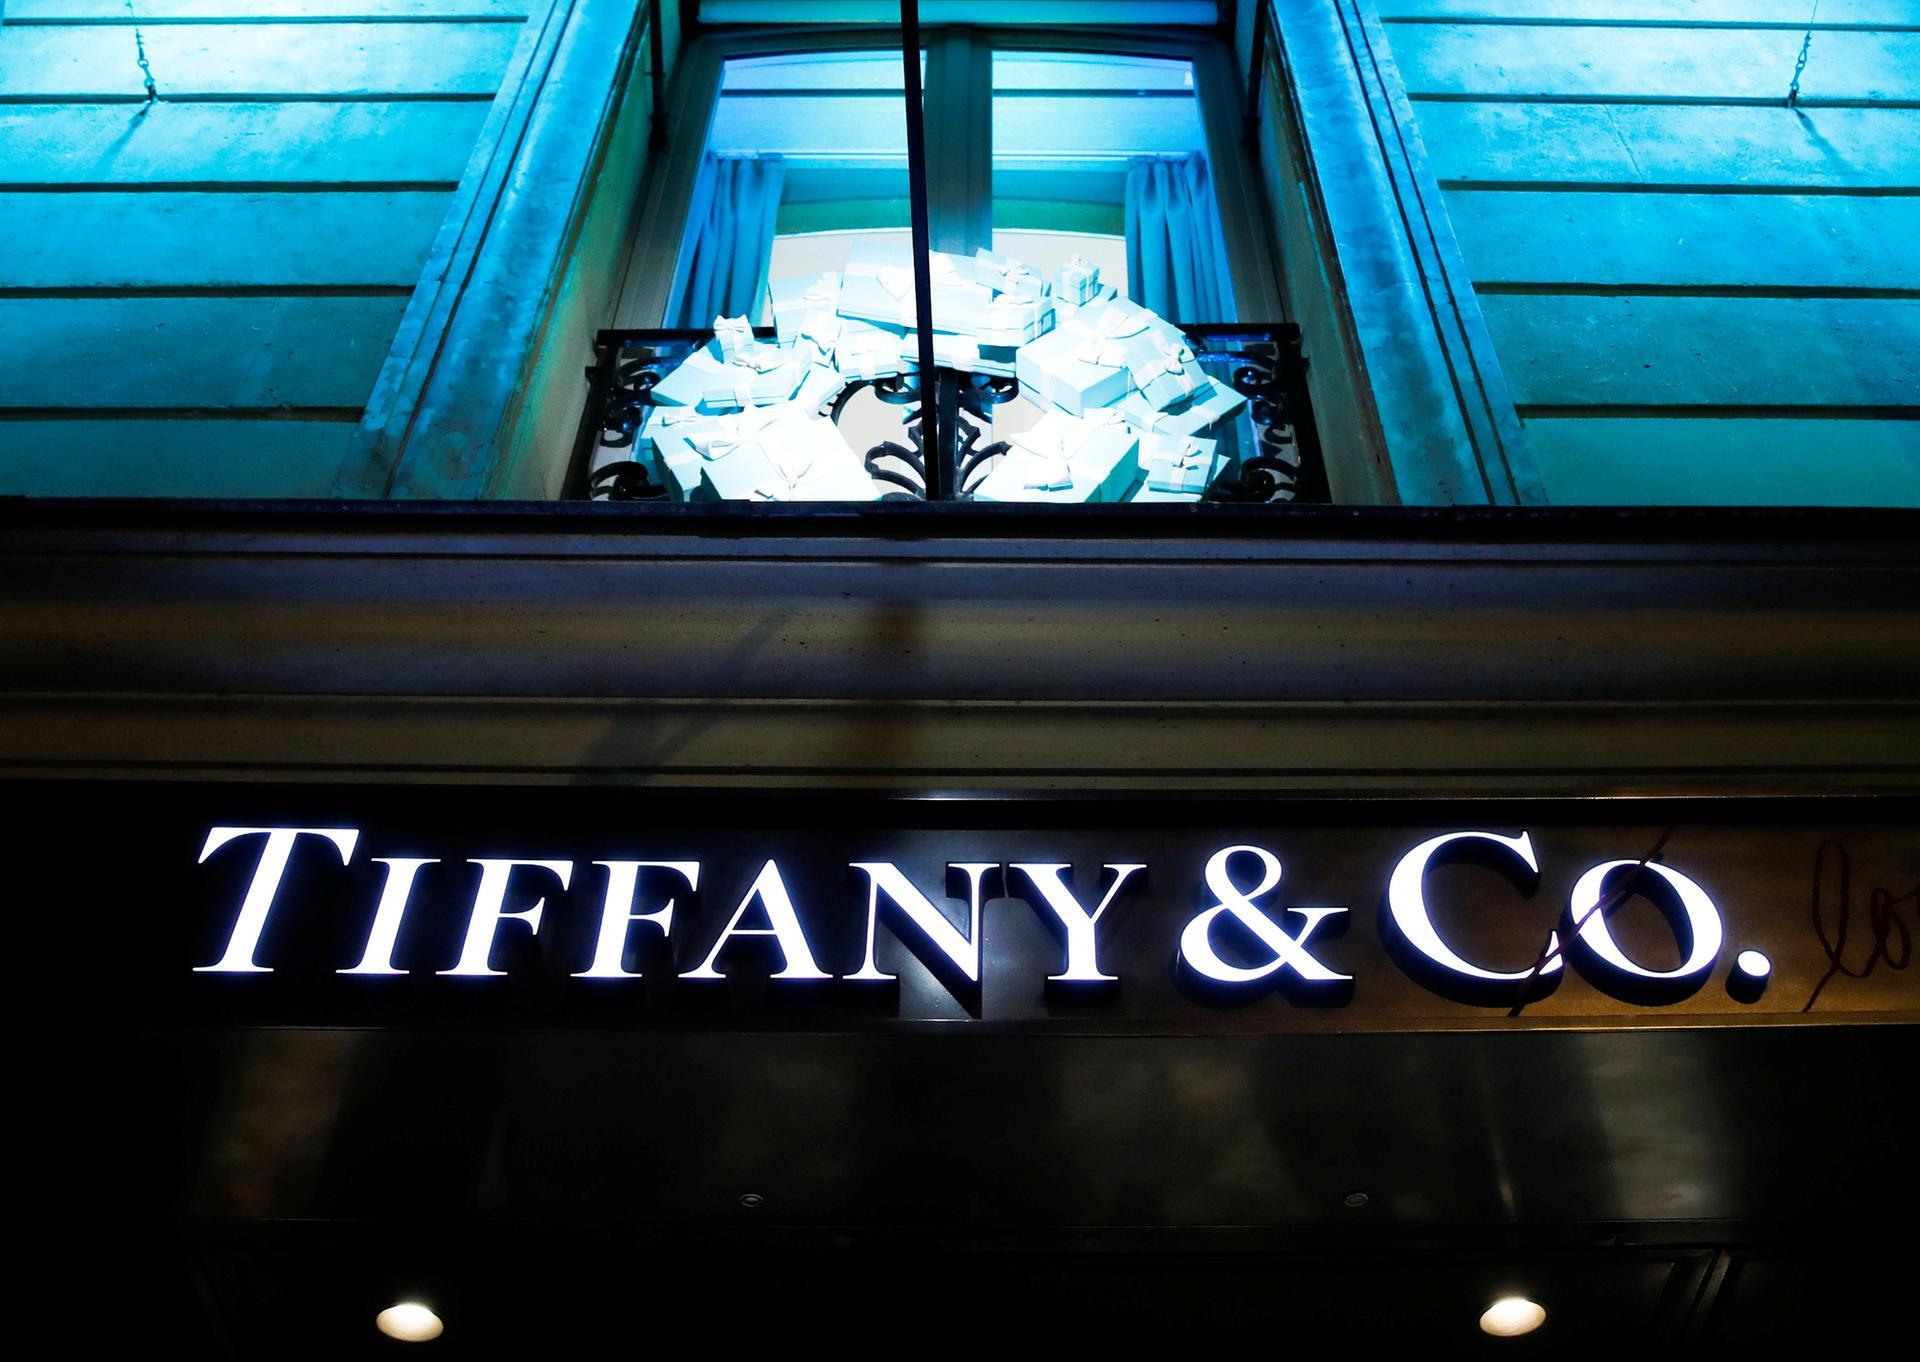 LVMH to buy French jewellery producer Platinum Invest to ramp up Tiffany  production, ET Retail